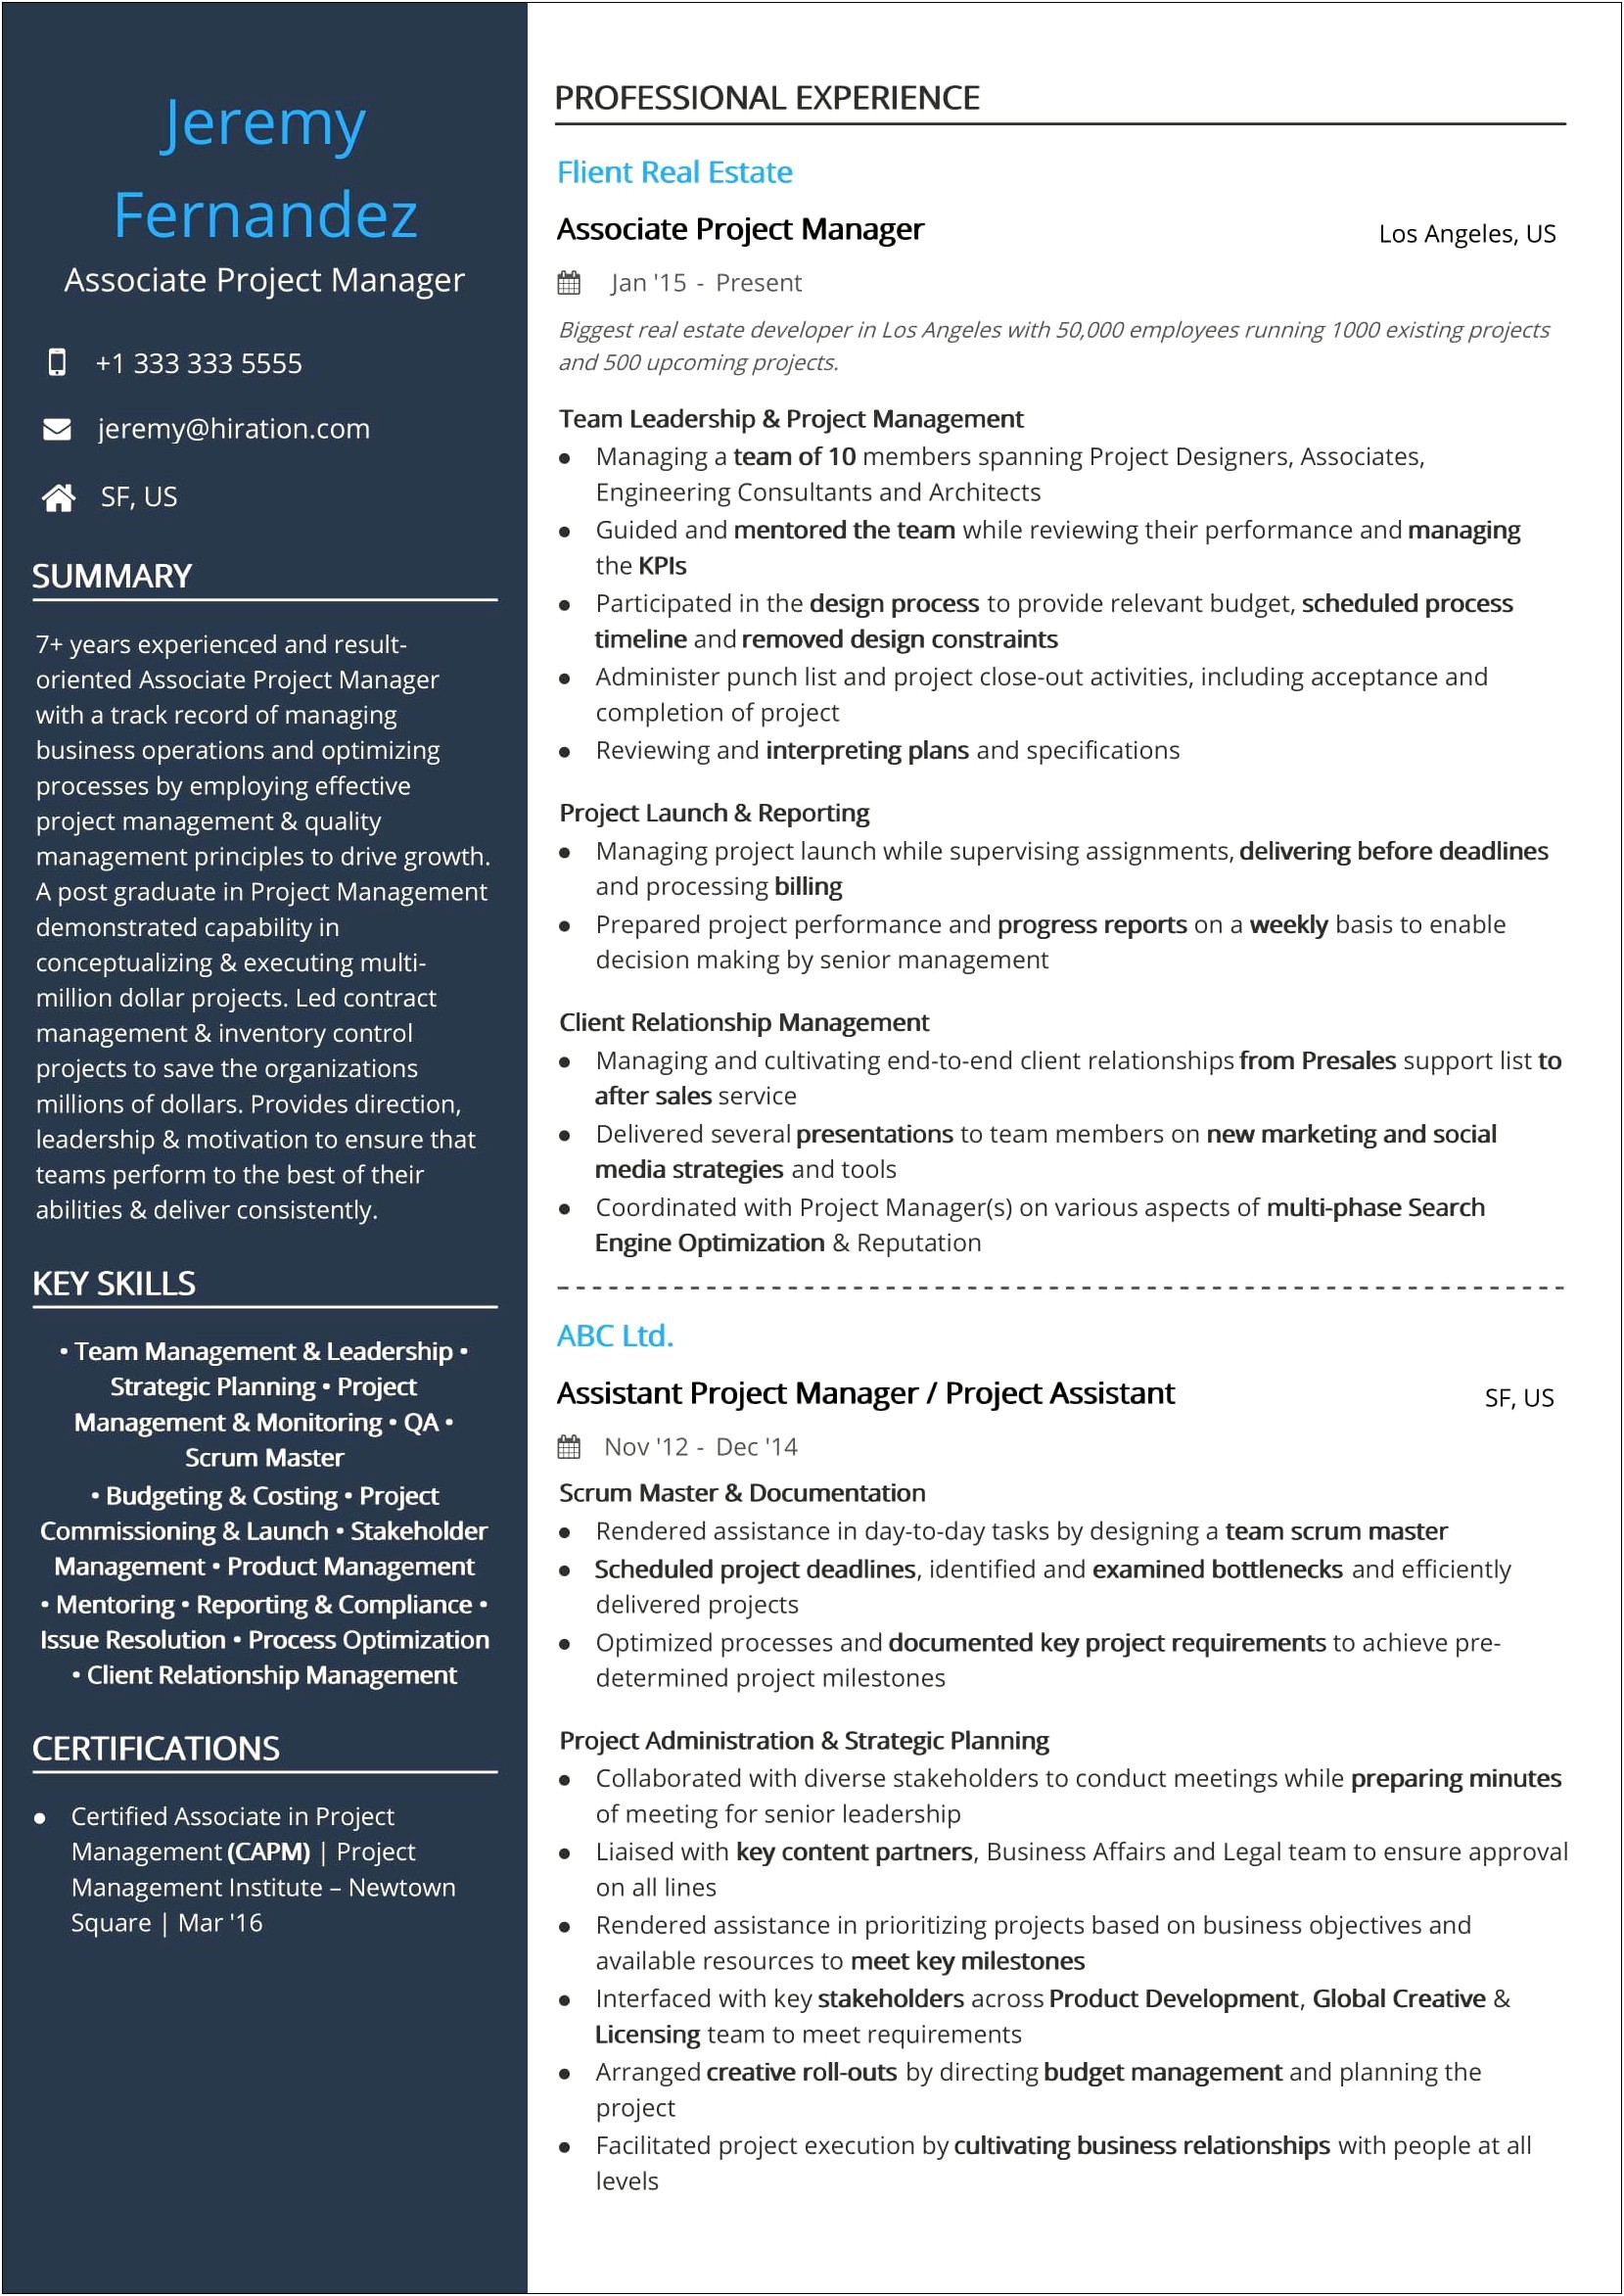 Associate Product Manager Sample Resume